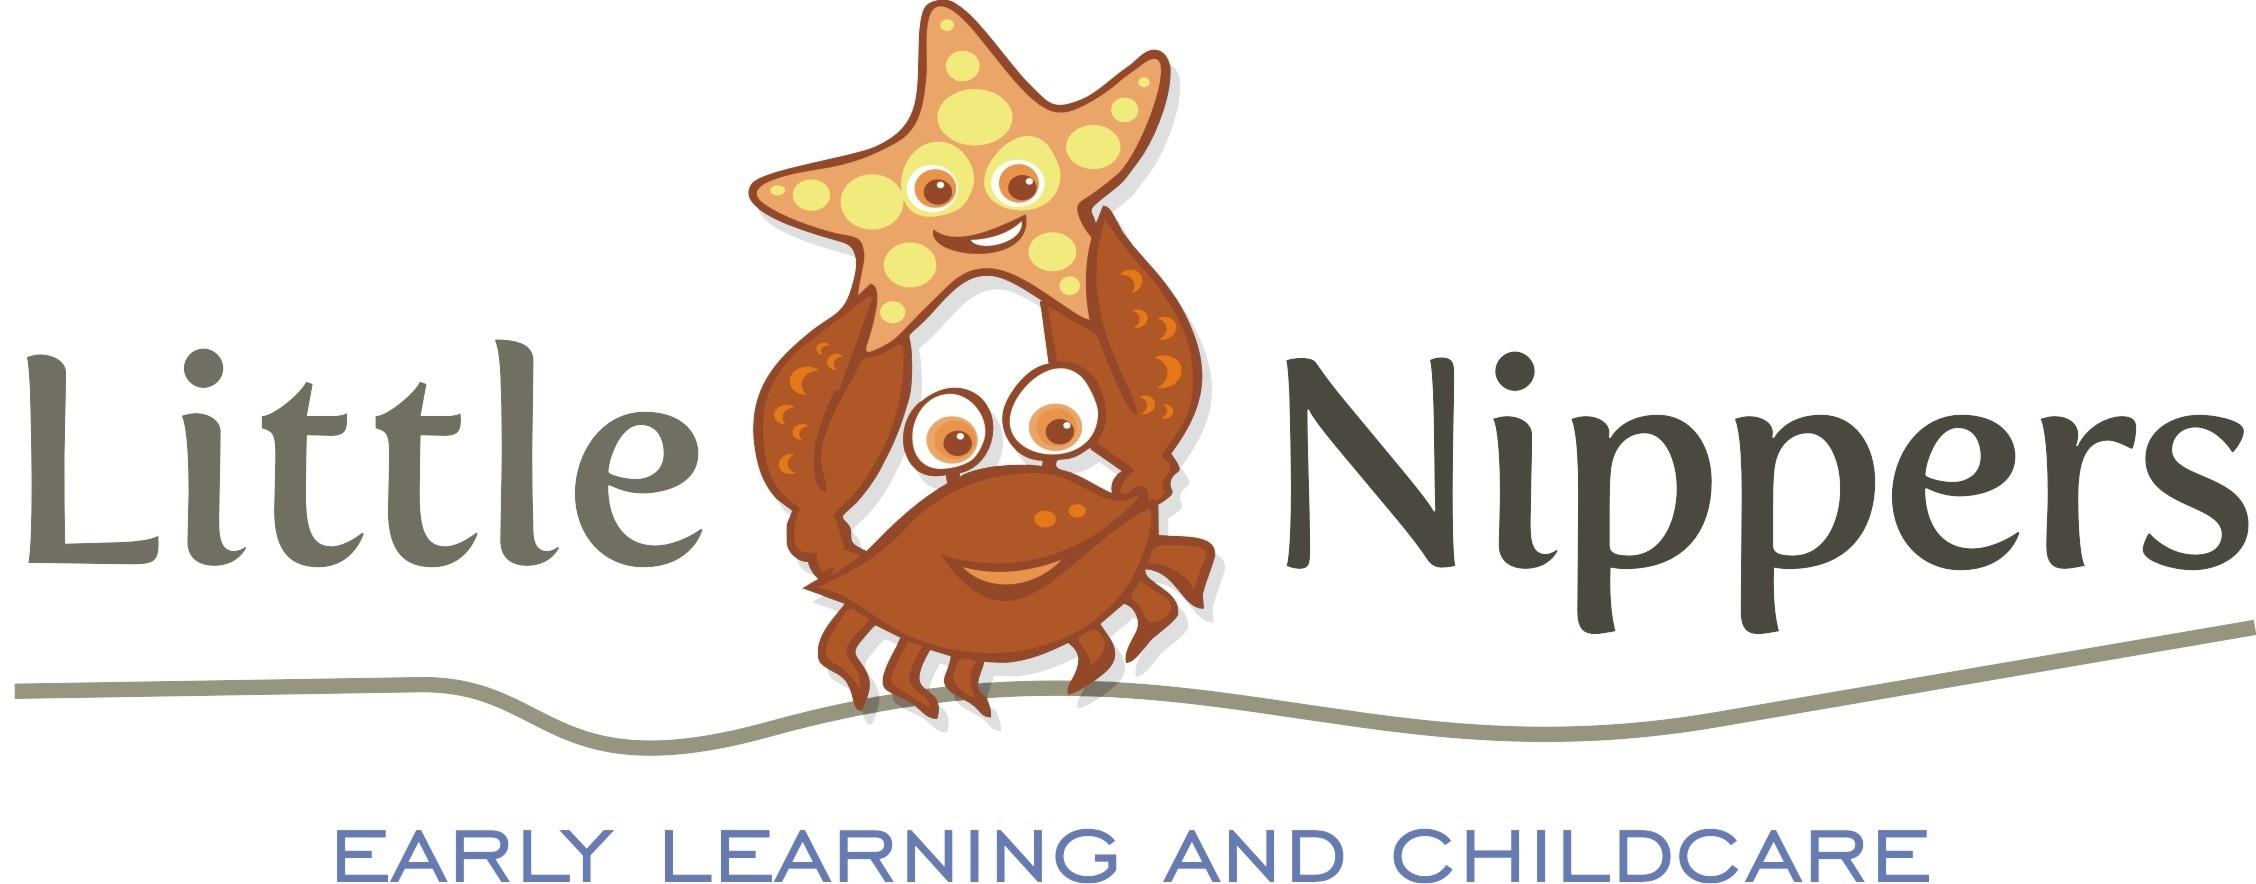 Little Nippers Early Learning and Child Care